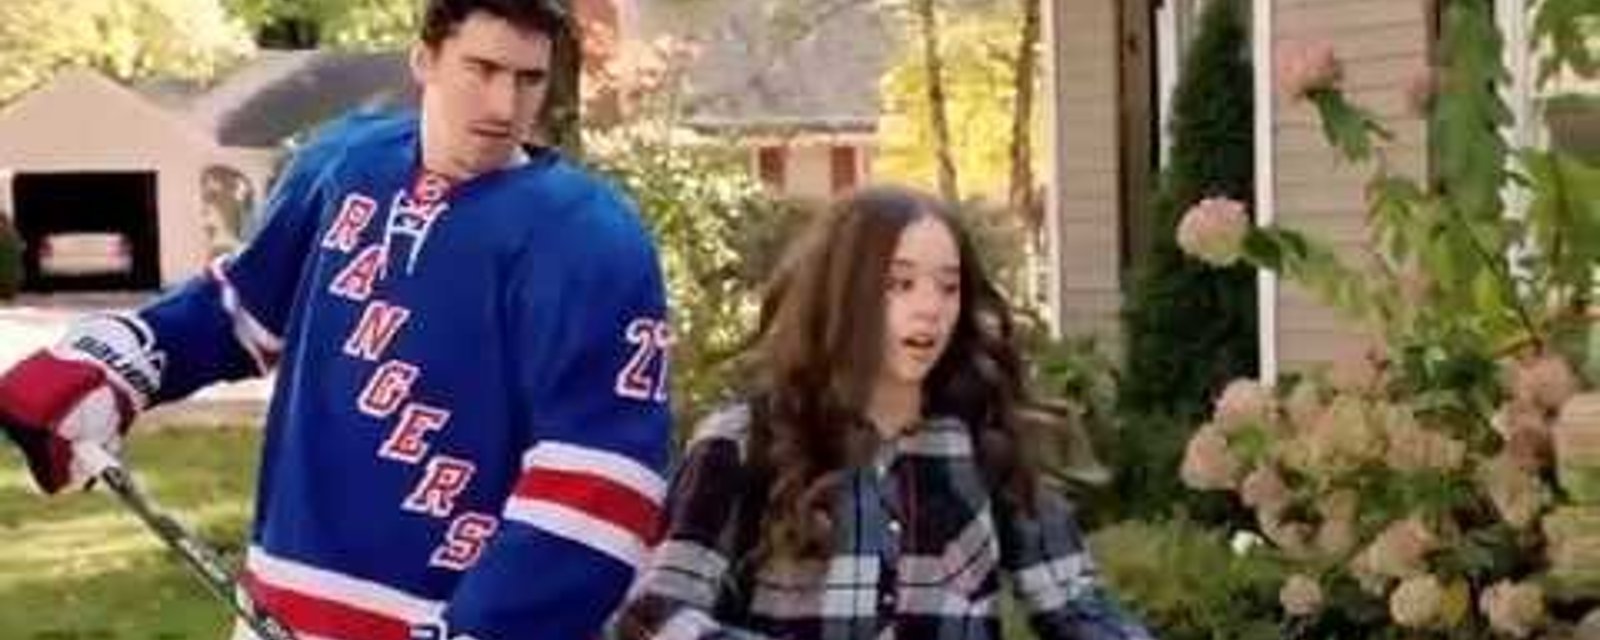 This Rangers commercial is pure comedy gold